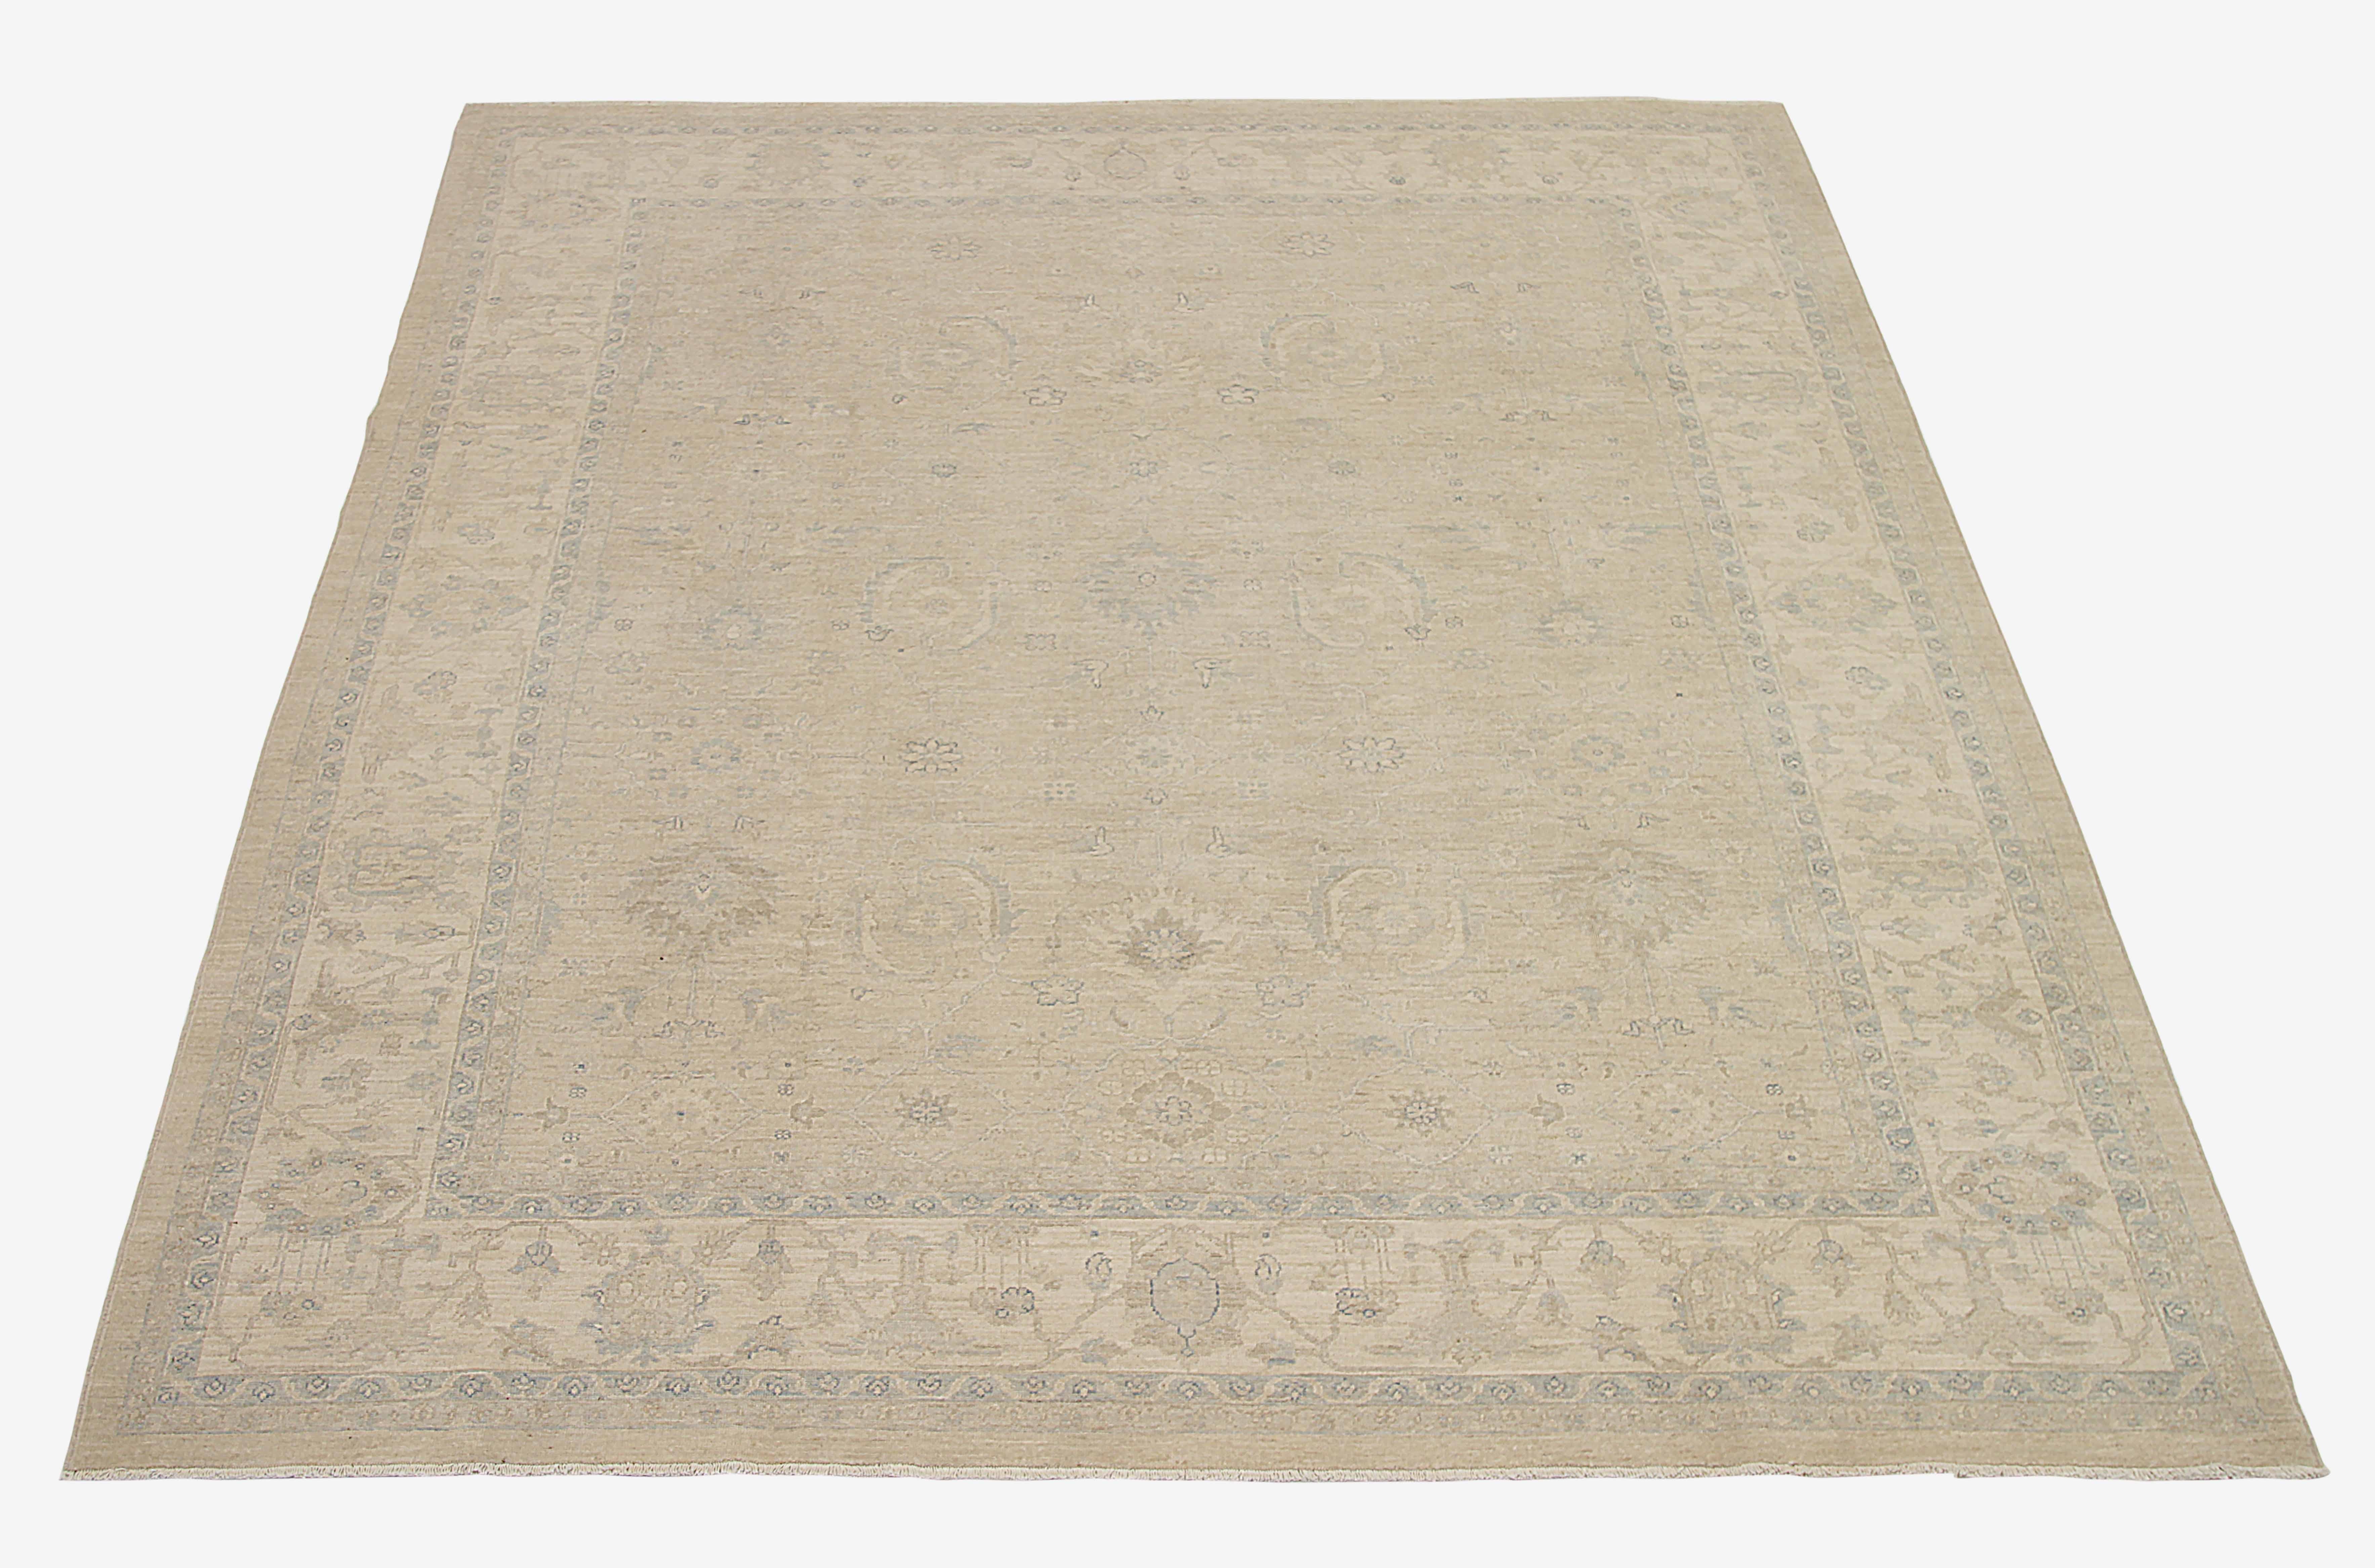 New Afghan area rug handwoven from the finest sheep’s wool. It’s colored with all-natural vegetable dyes that are safe for humans and pets. It’s a traditional Farahan design handwoven by expert artisans. It’s a lovely area rug that can be